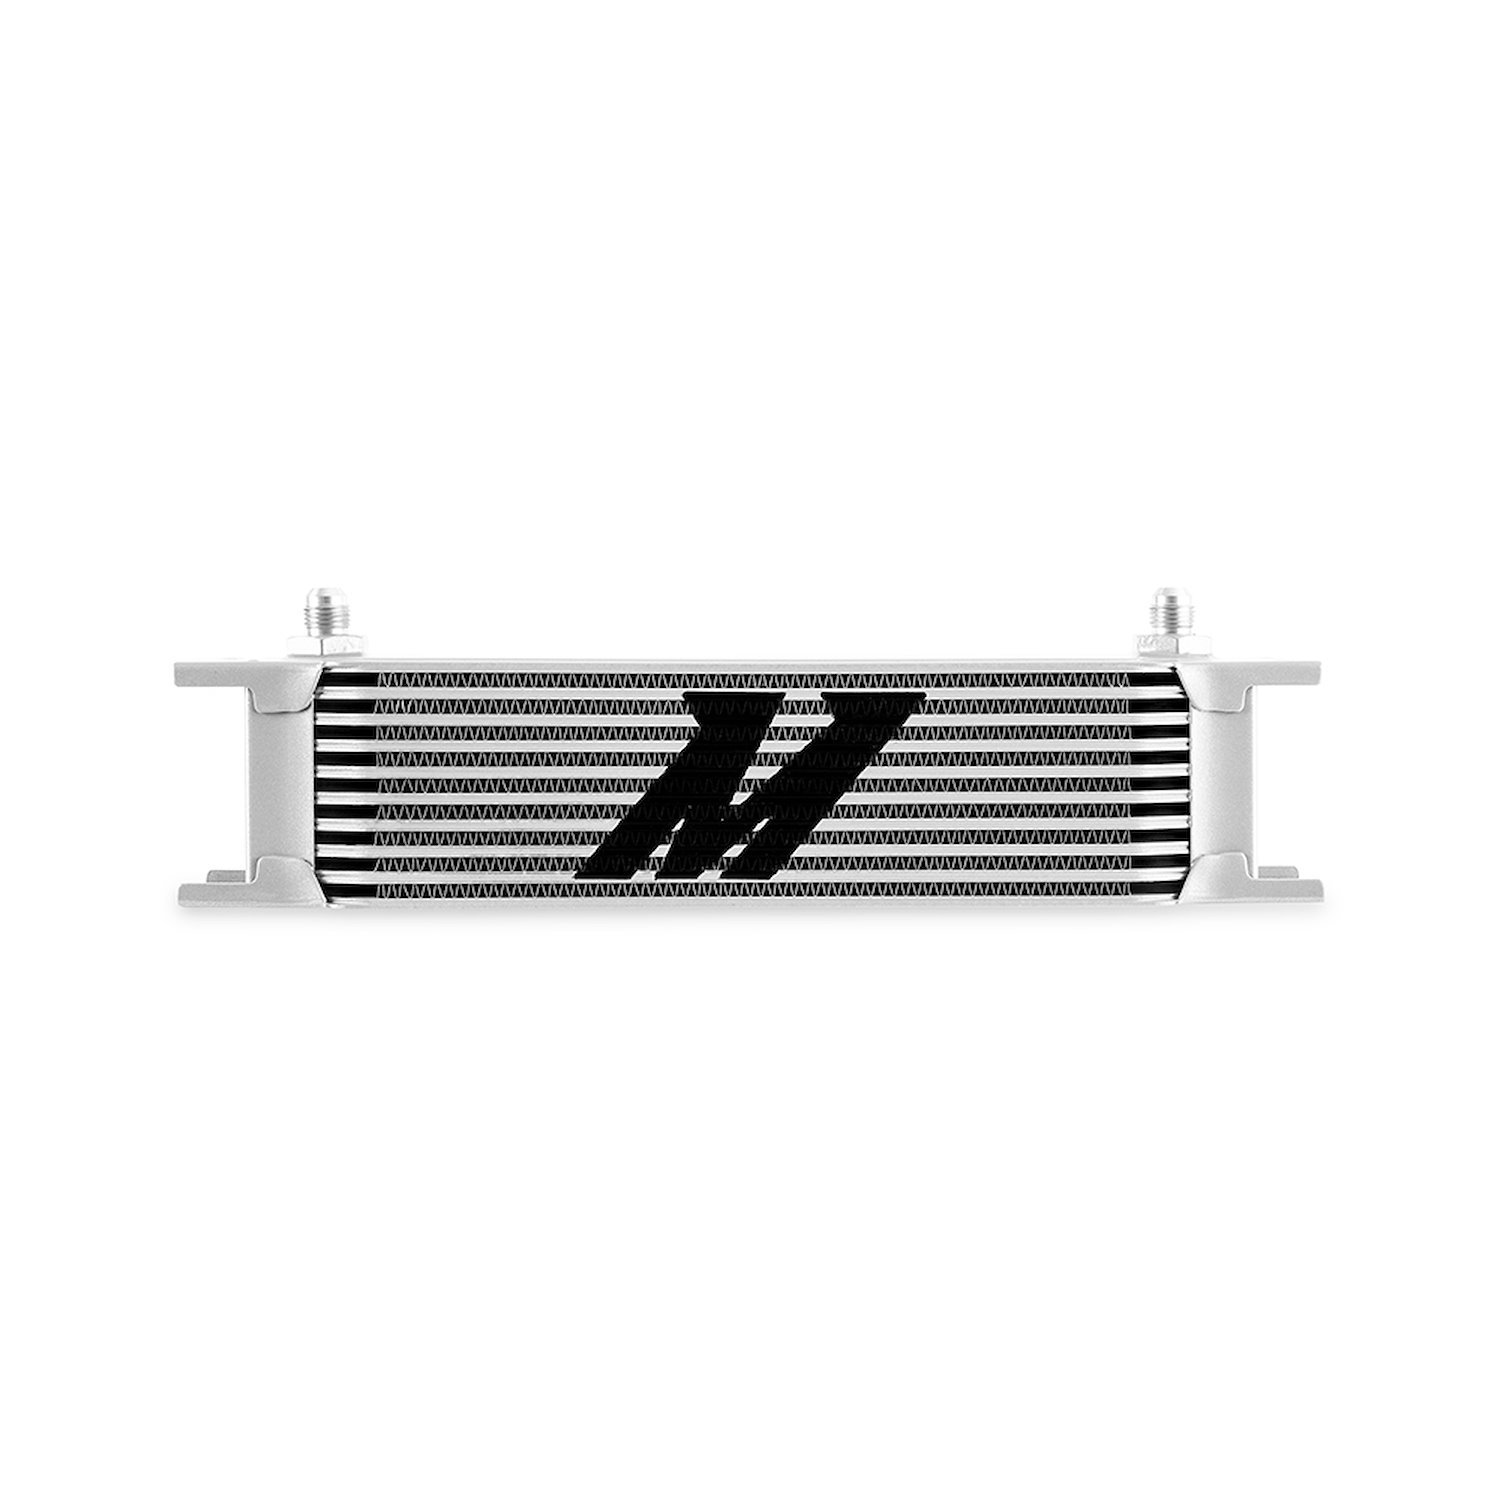 MMOC-10-6SL Universal 10-Row Oil Cooler, -6AN